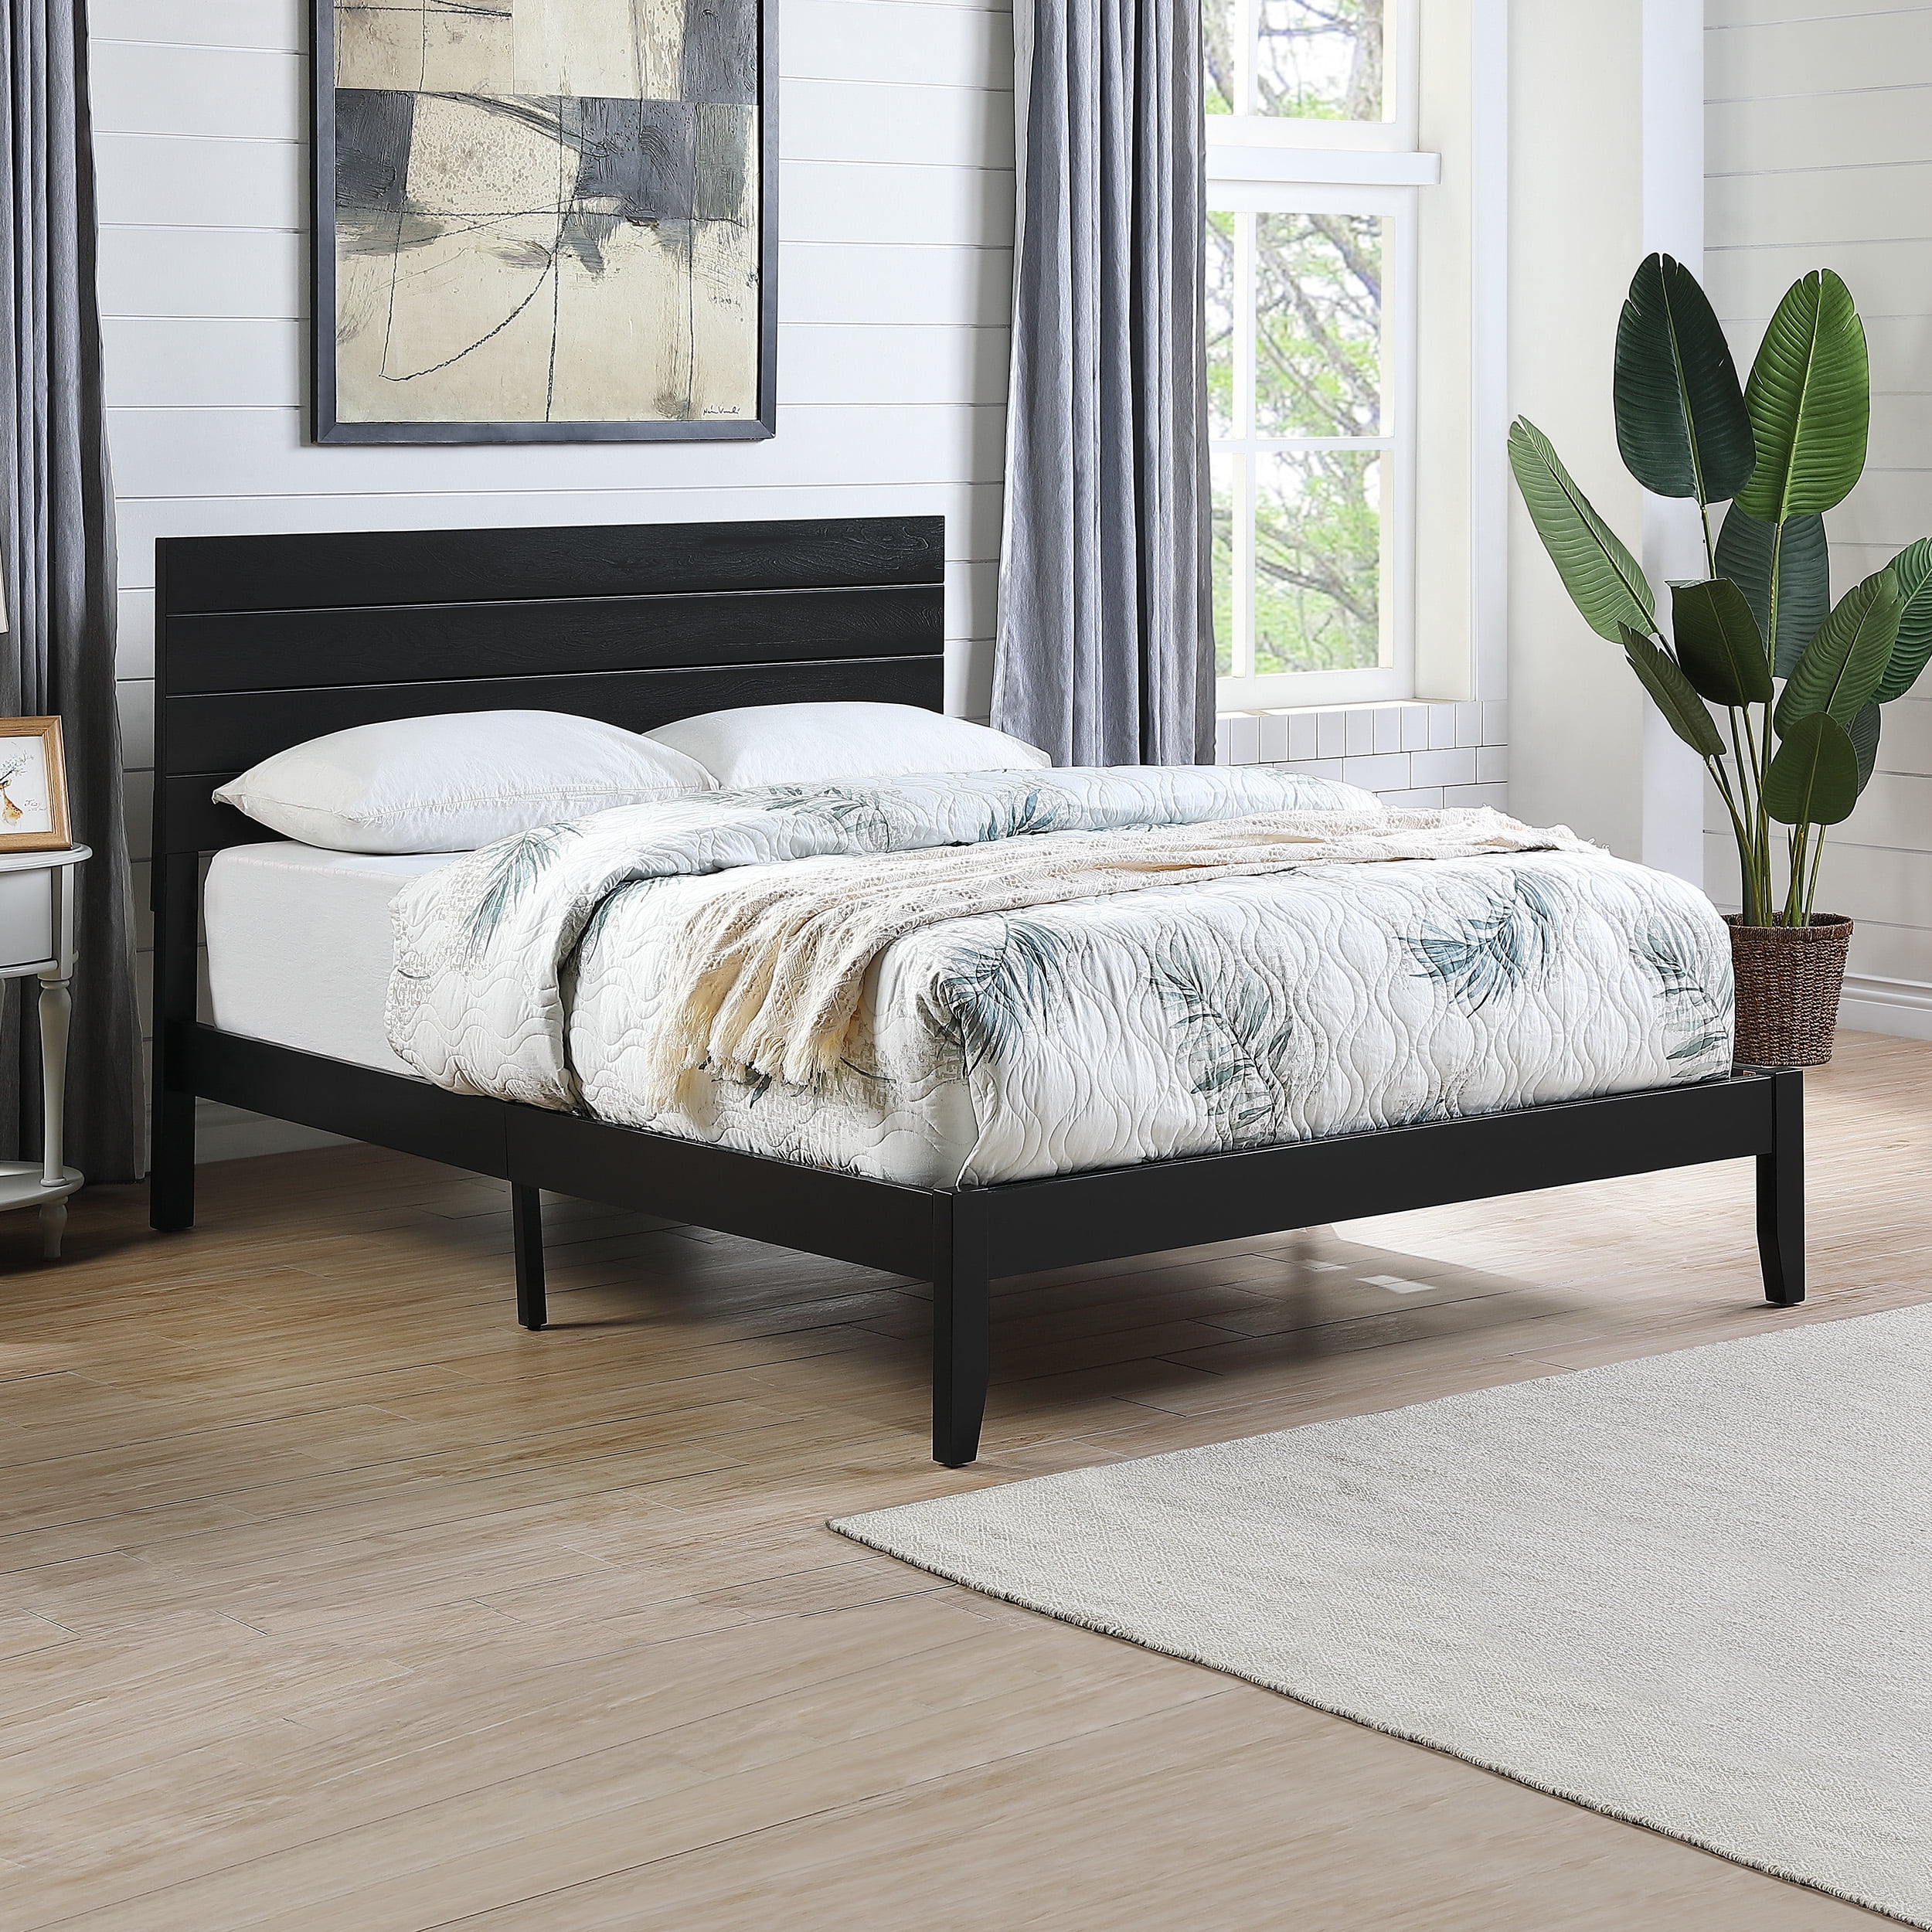 Apollo Queen Size Bed With Headboard, Avey Bed Frame By Mercury Row